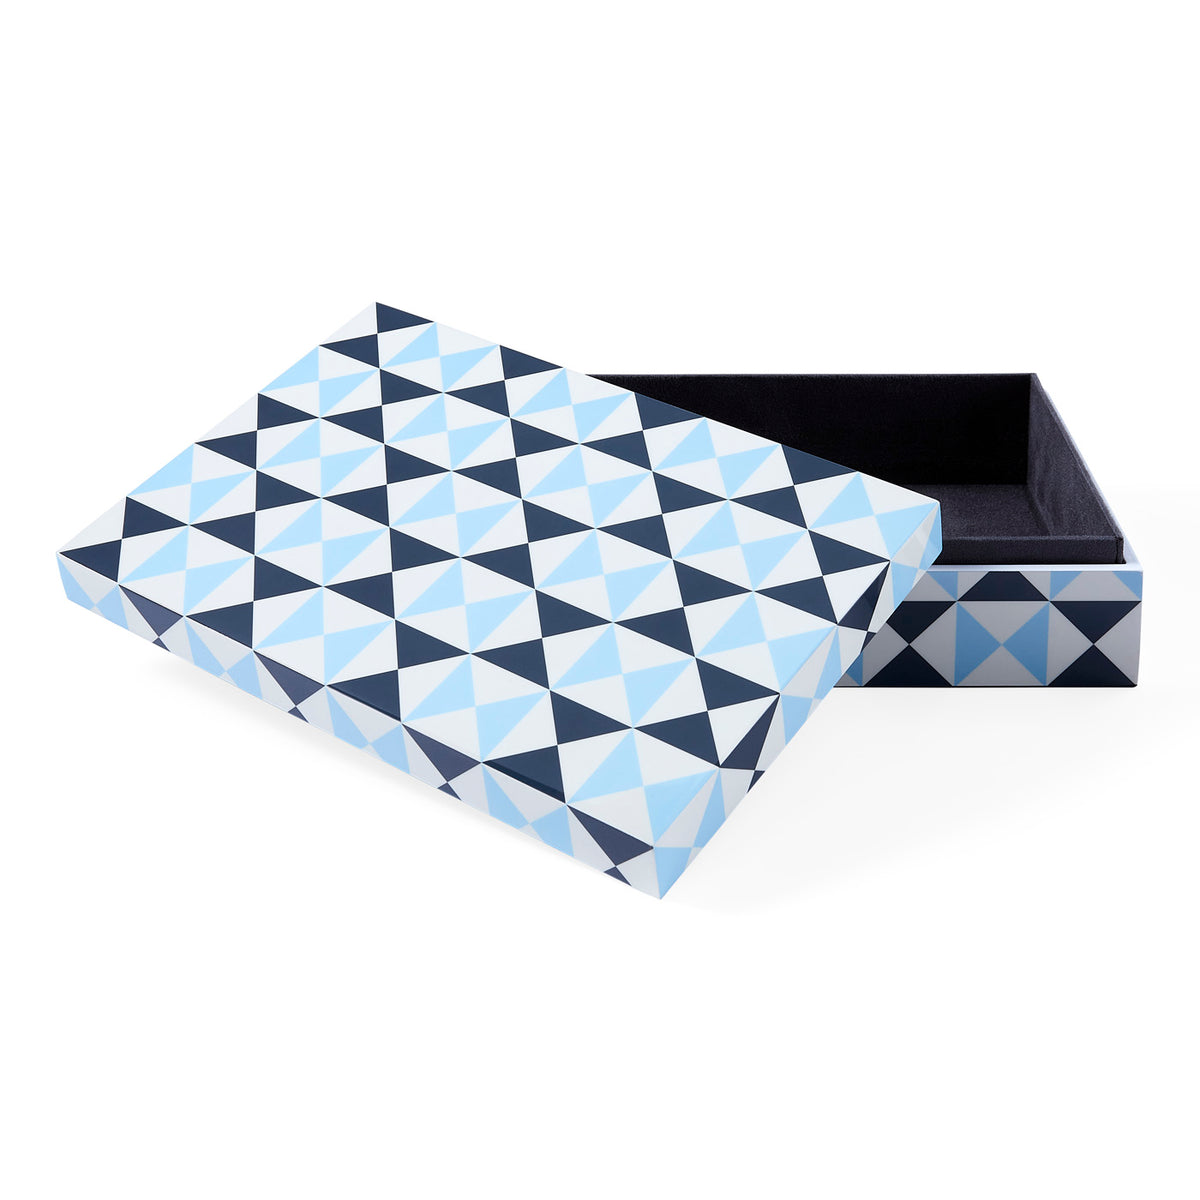 Large Bowtie Lacquer Box by Jonathan Adler